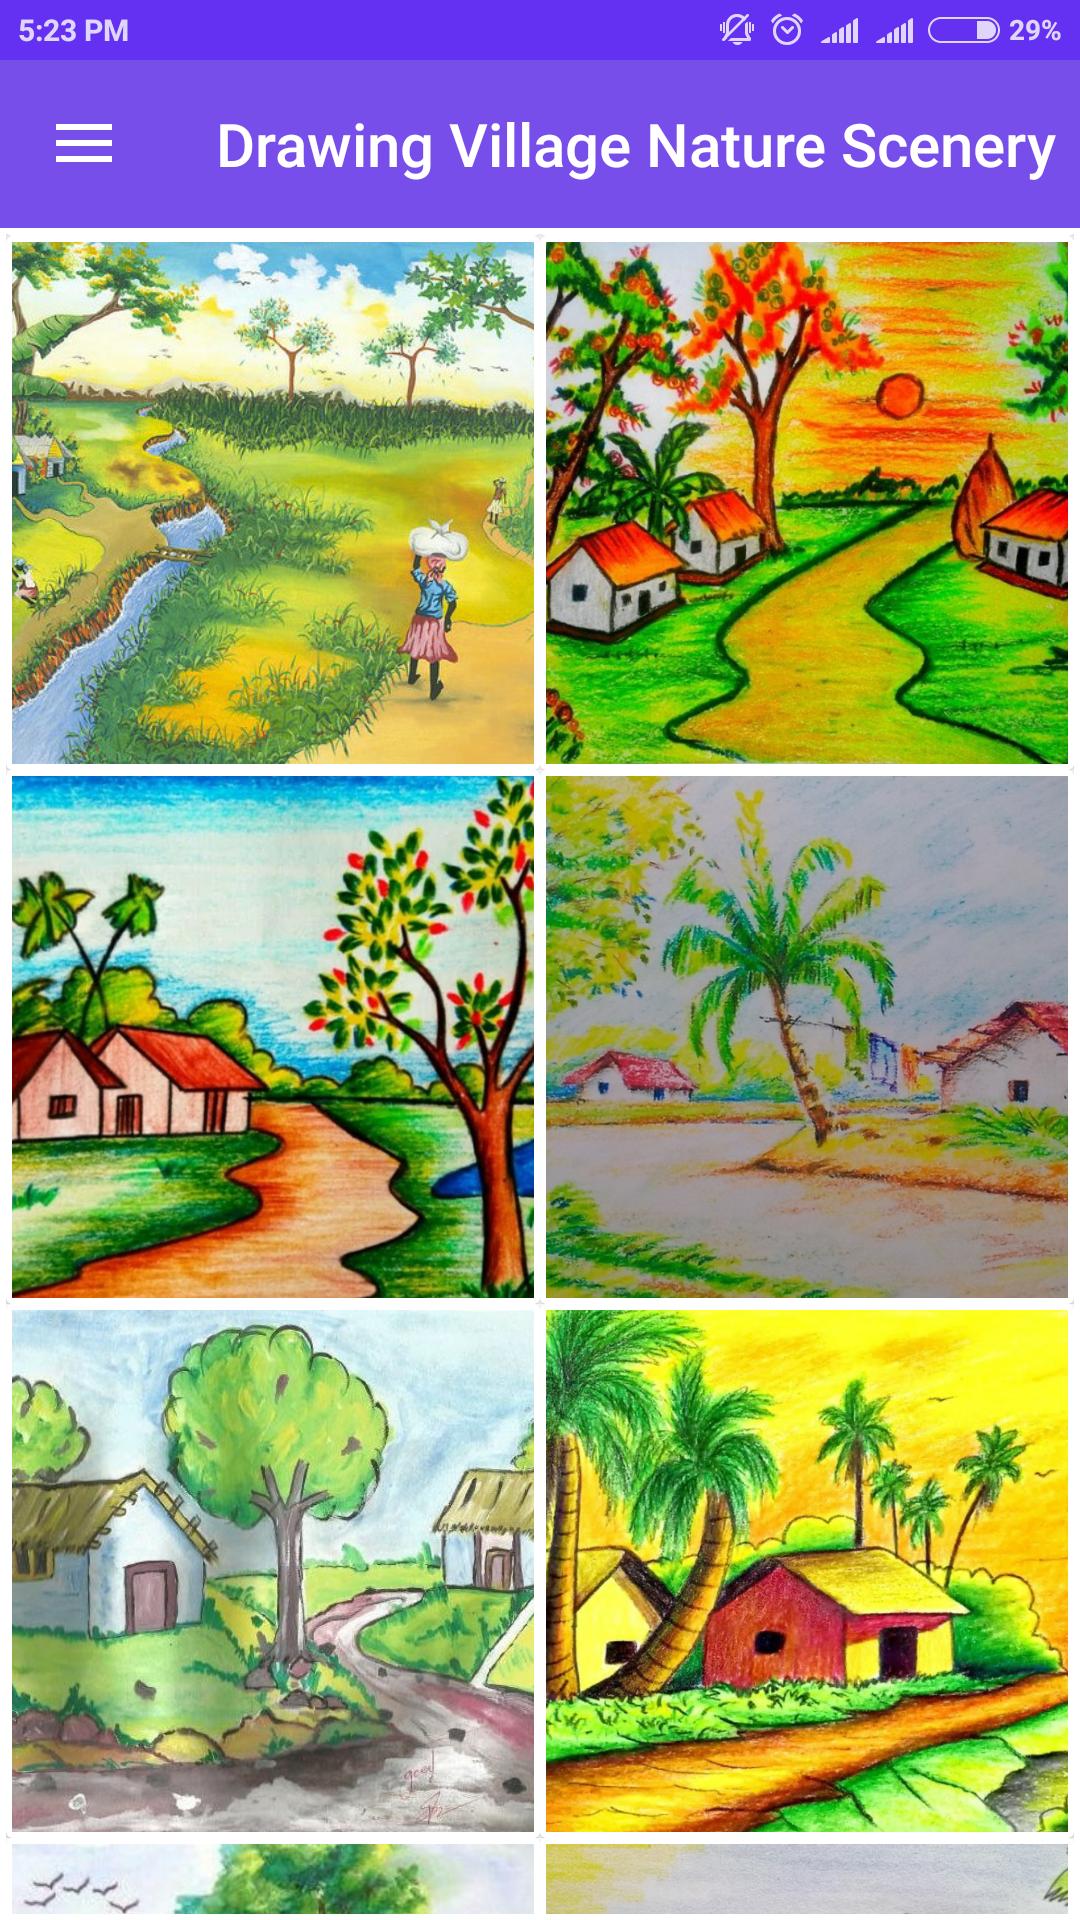 Drawing Village Nature Scenery for Android - APK Download